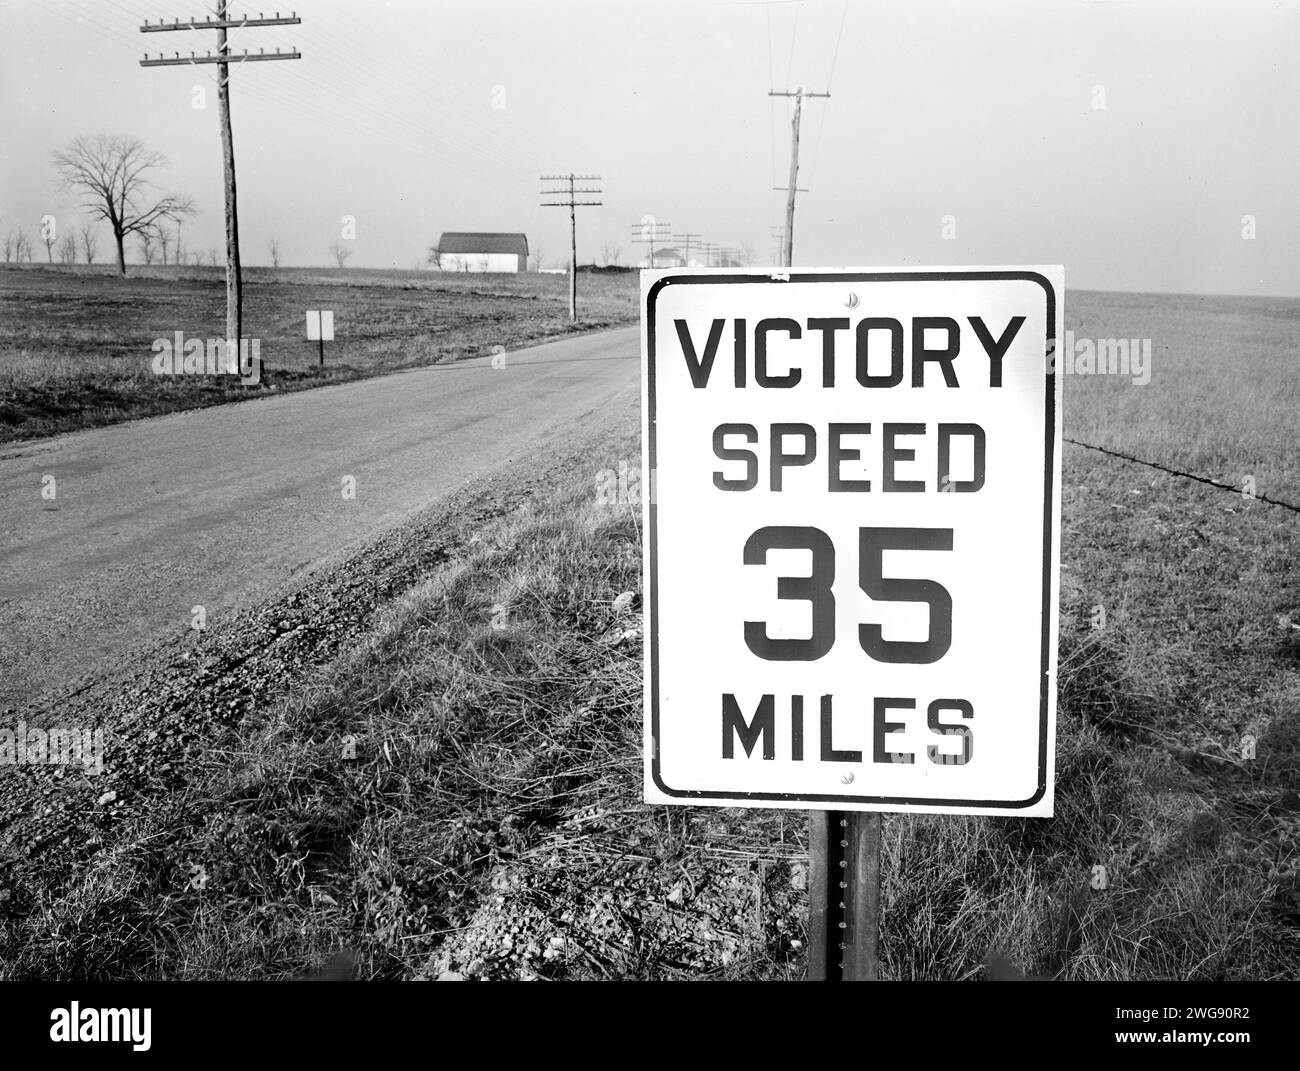 Speed sign on road between Lititz and Manheim, Pennsylvania, USA, Marjory Collins, U.S. Office of War Information, November 1942 Stock Photo